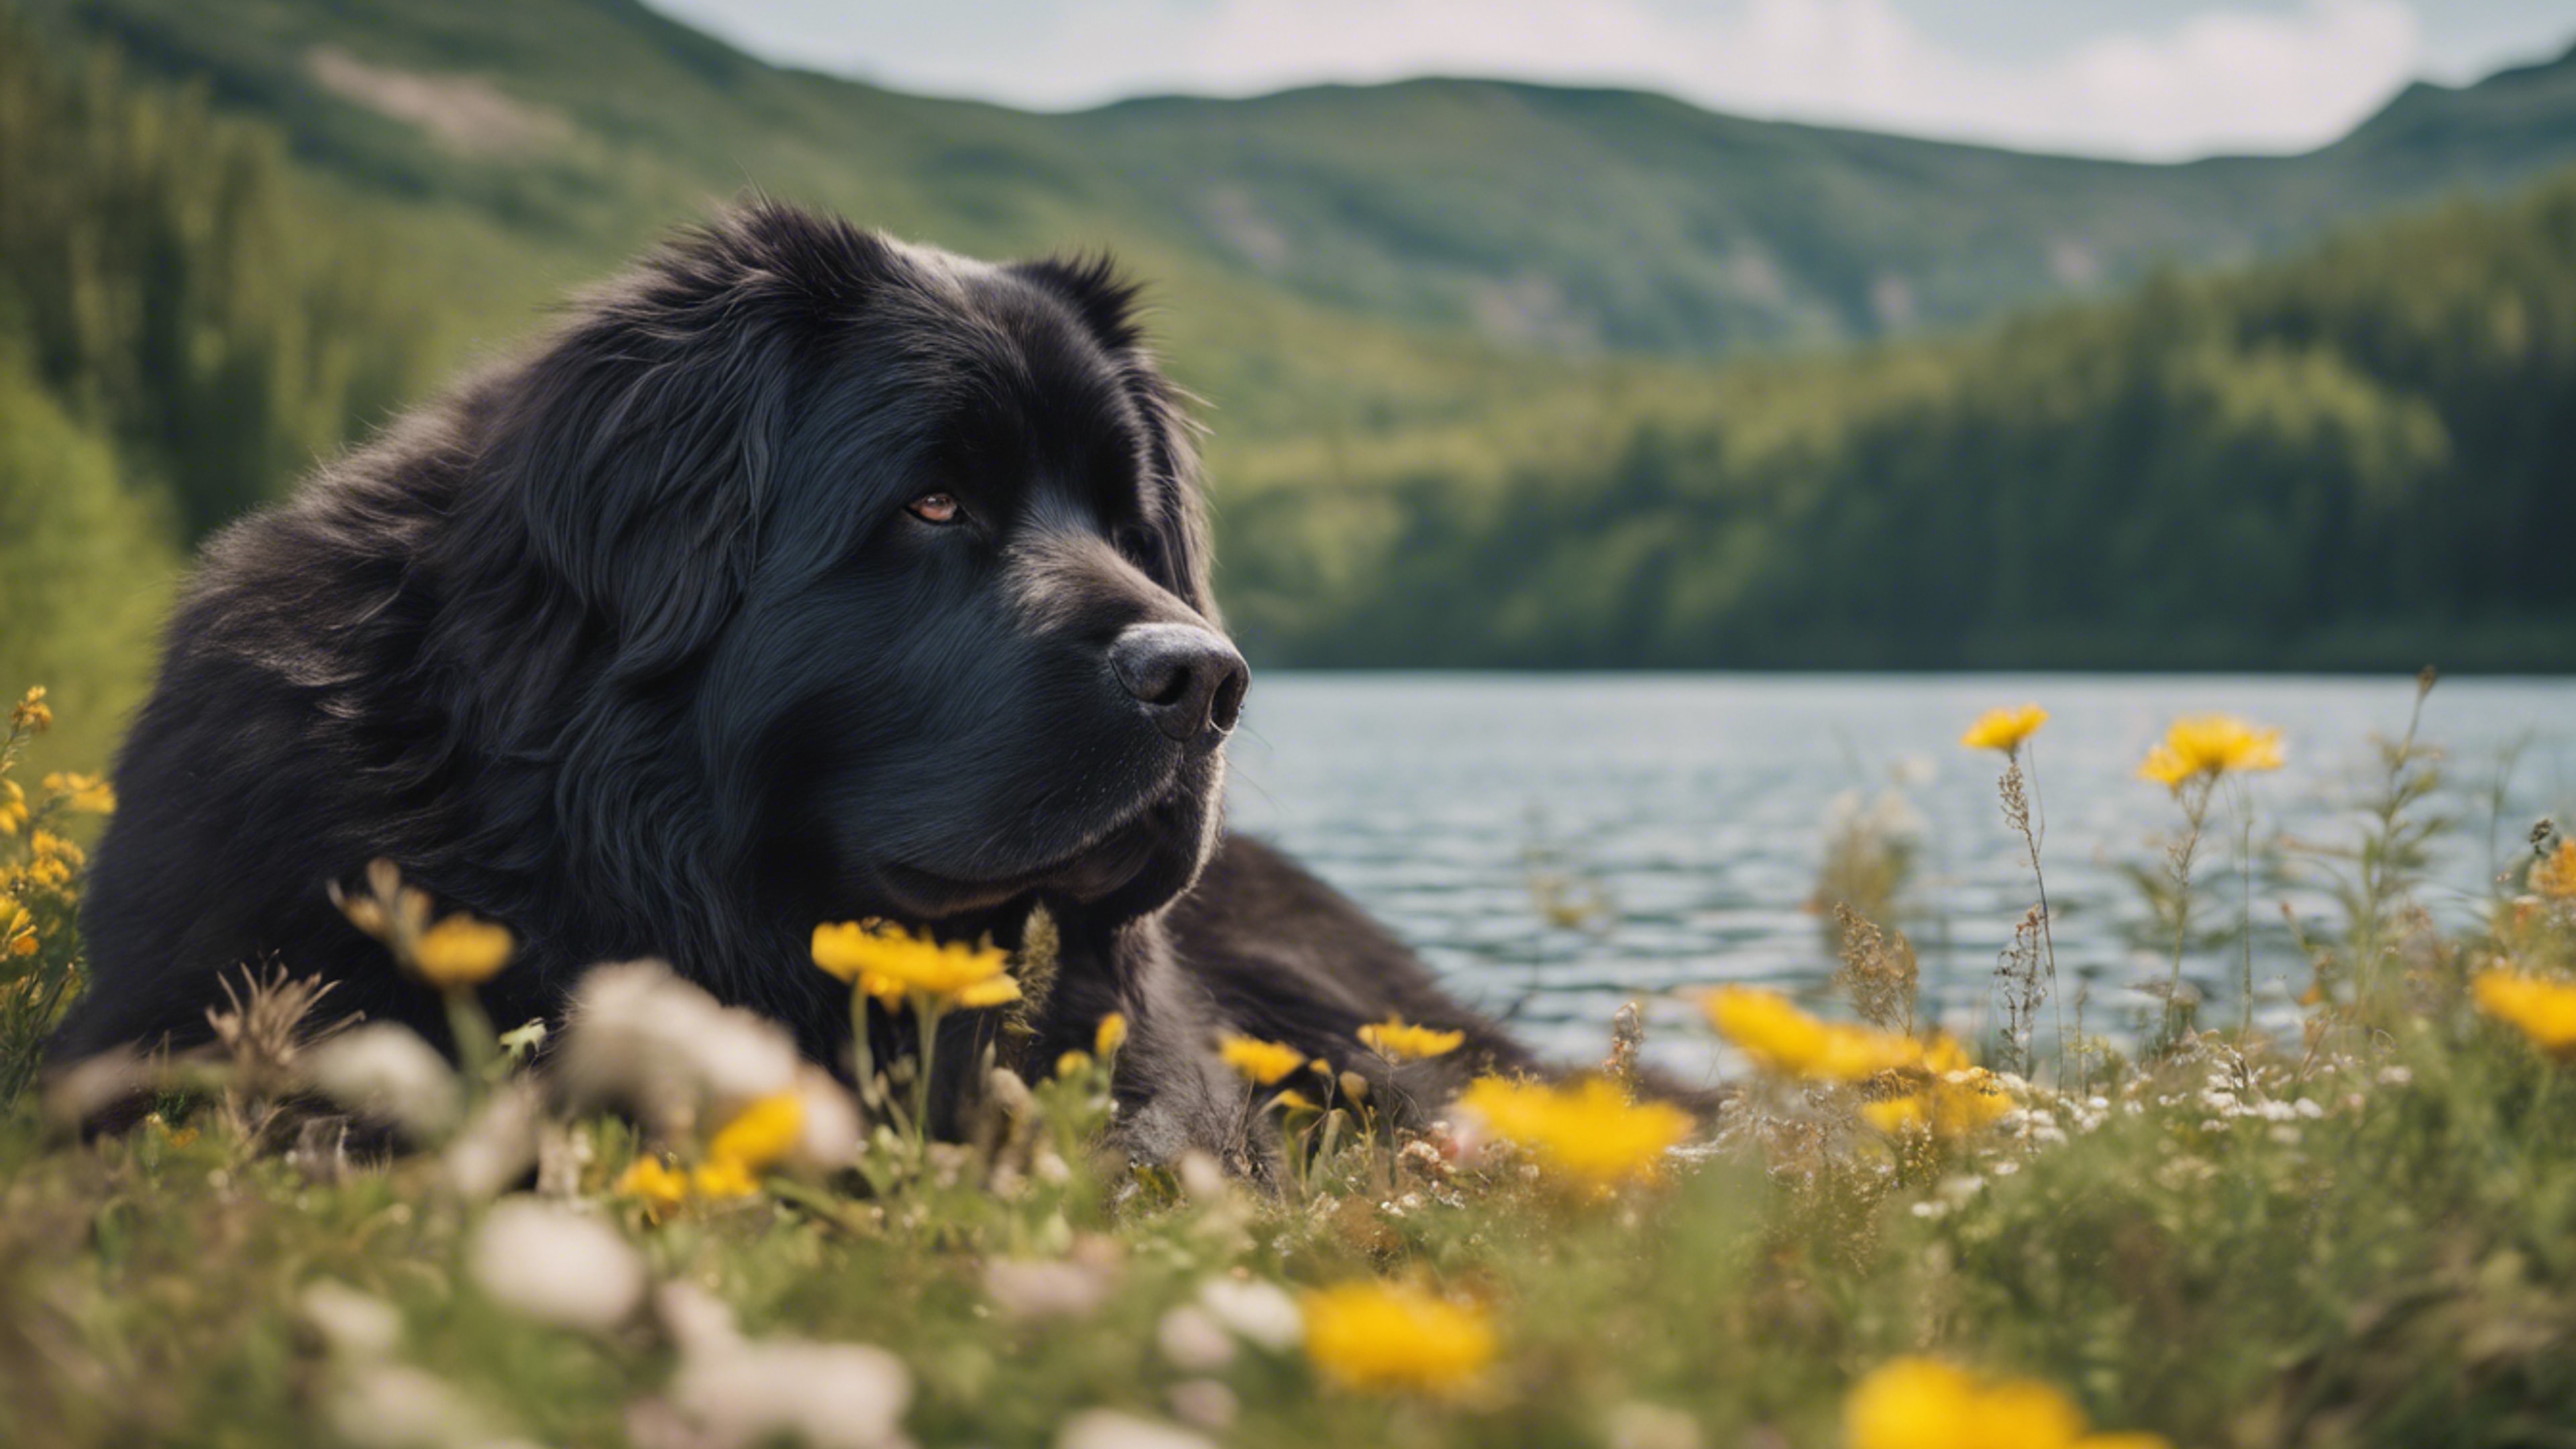 A Newfoundland dog sleeping at the edge of a serene lake, surrounded by a carpet of wildflowers.壁紙[8e7d66a335a34d2292da]